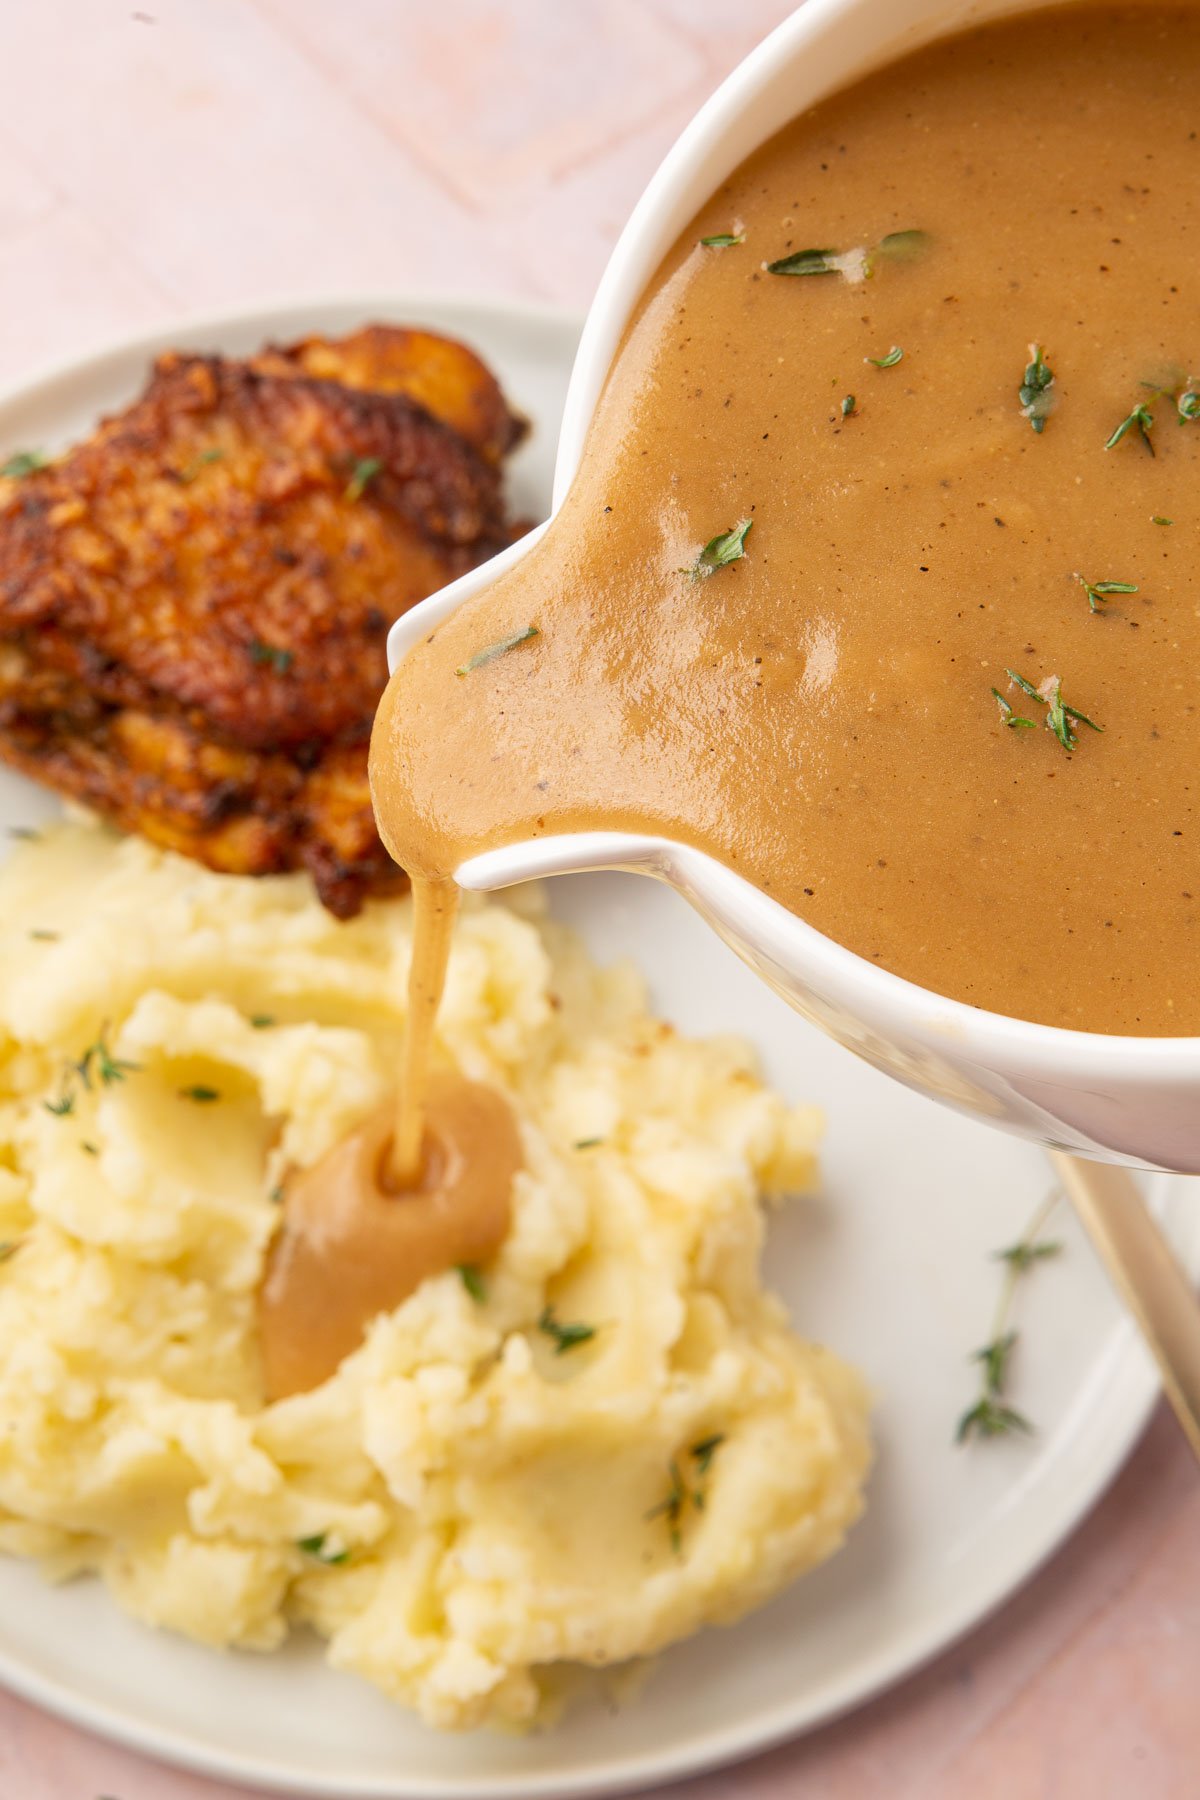 A gravy boat pouring gluten-free gravy over a serving of mashed potatoes with a roasted chicken thigh in the background.